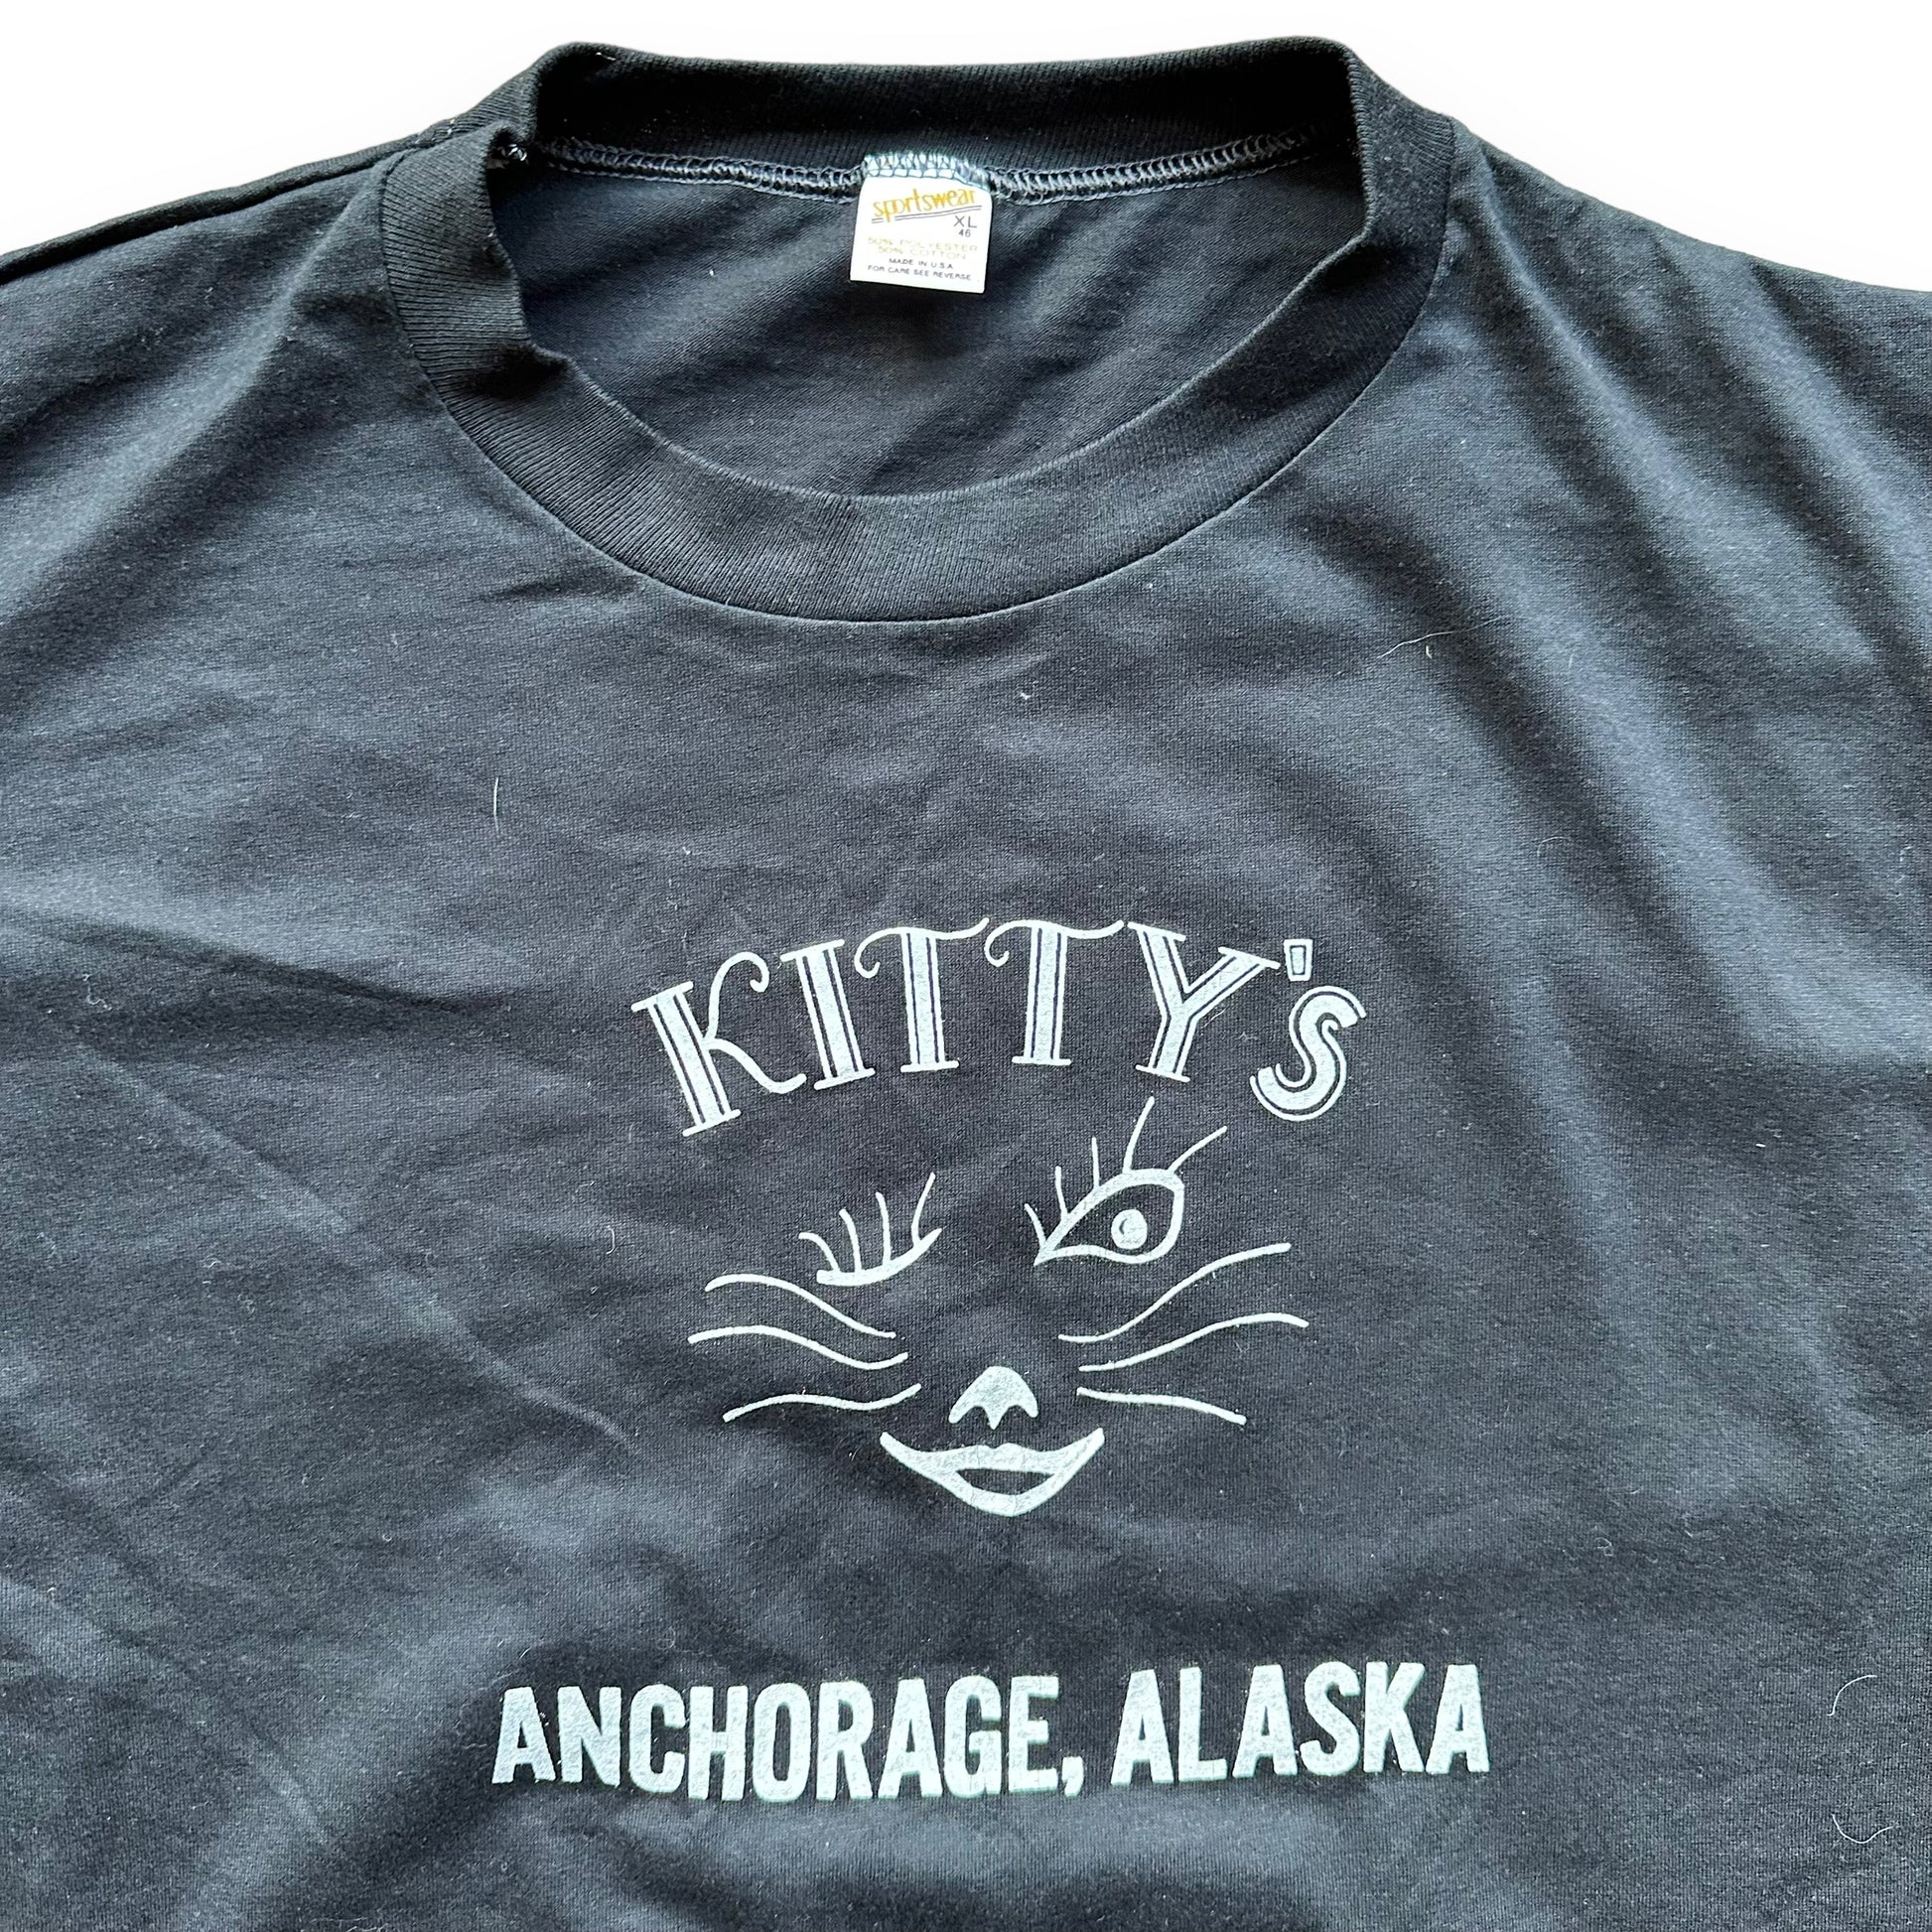 Upper Chest Graphic on Vintage Kitty's Anchorage Alaska Tee SZ XL | Vintage T-Shirts Seattle | Barn Owl Vintage Tees Seattle